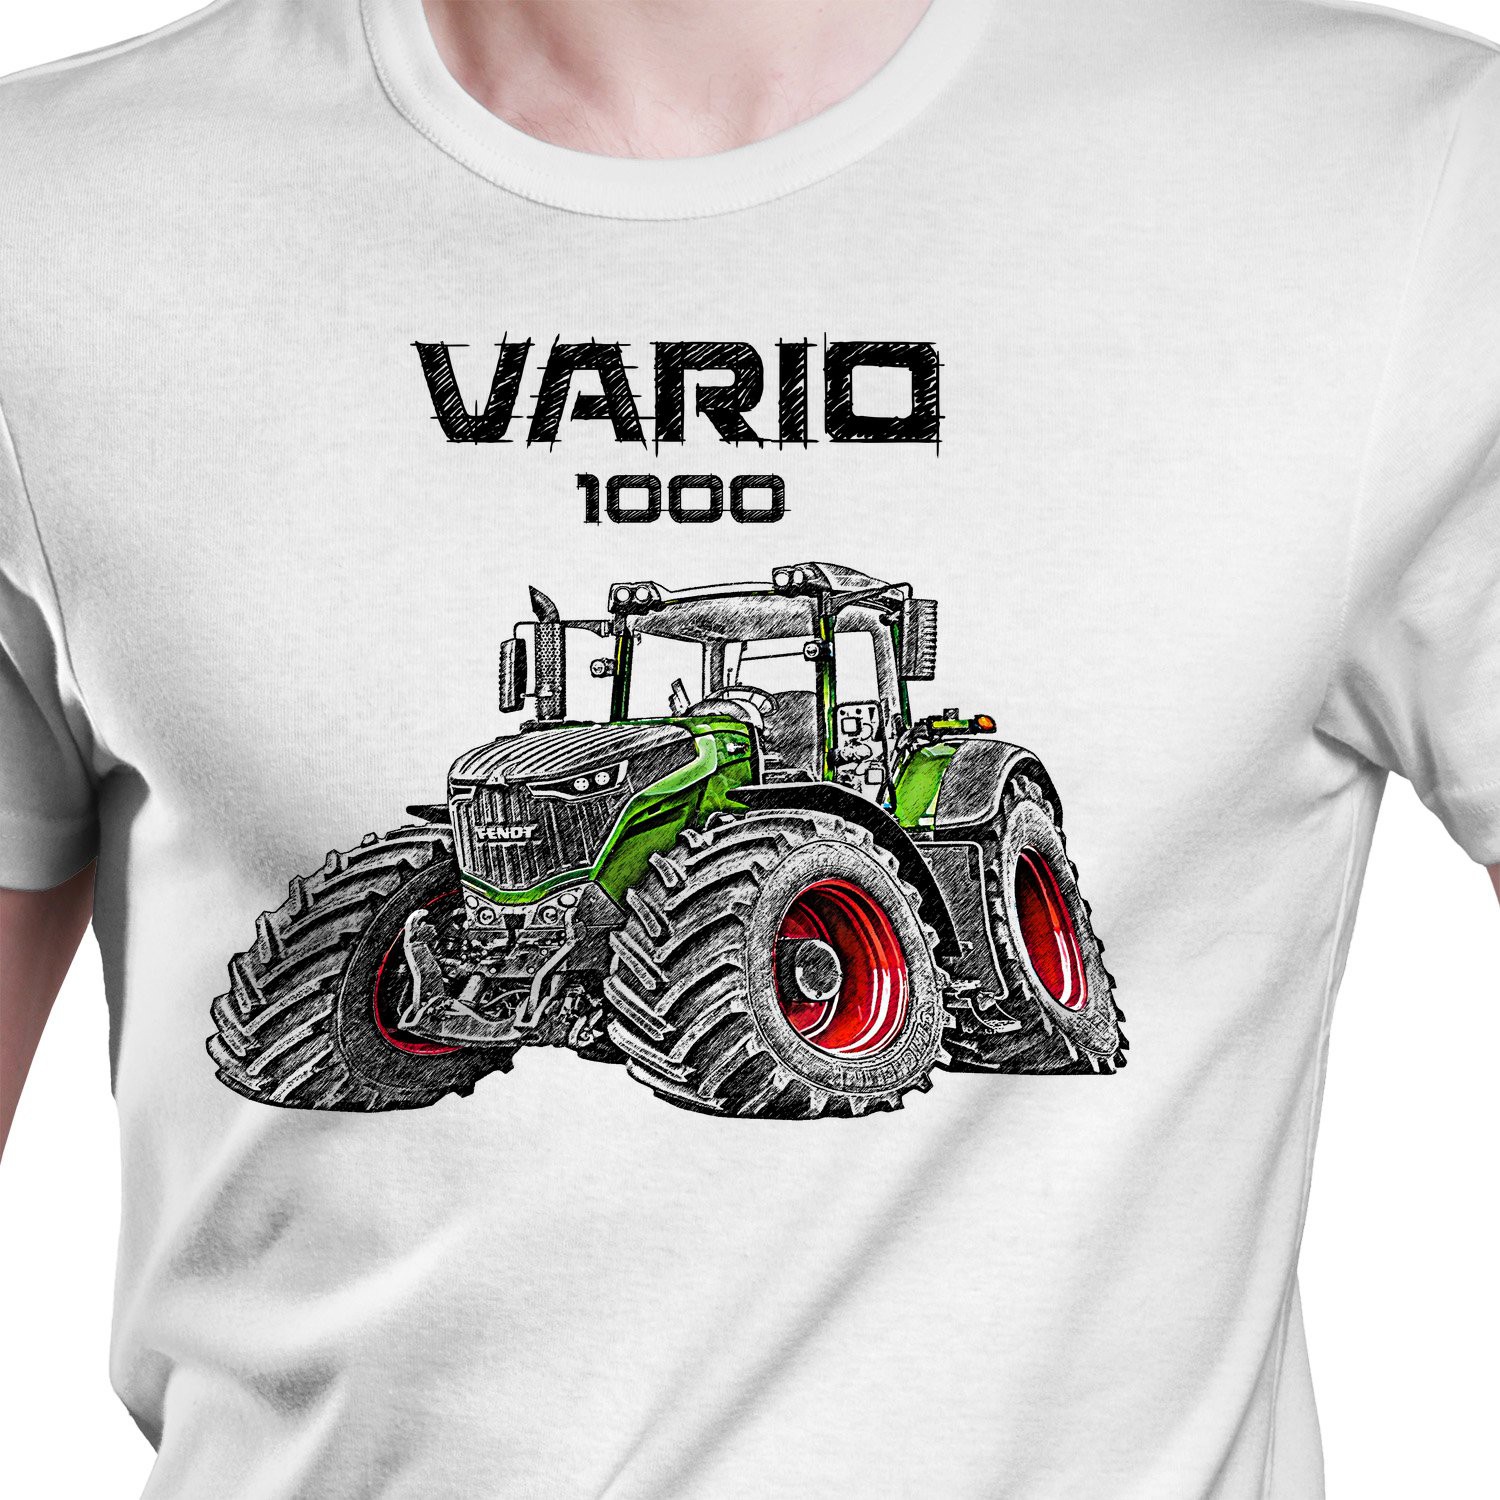 White T-shirt with Fendt Vario-1000